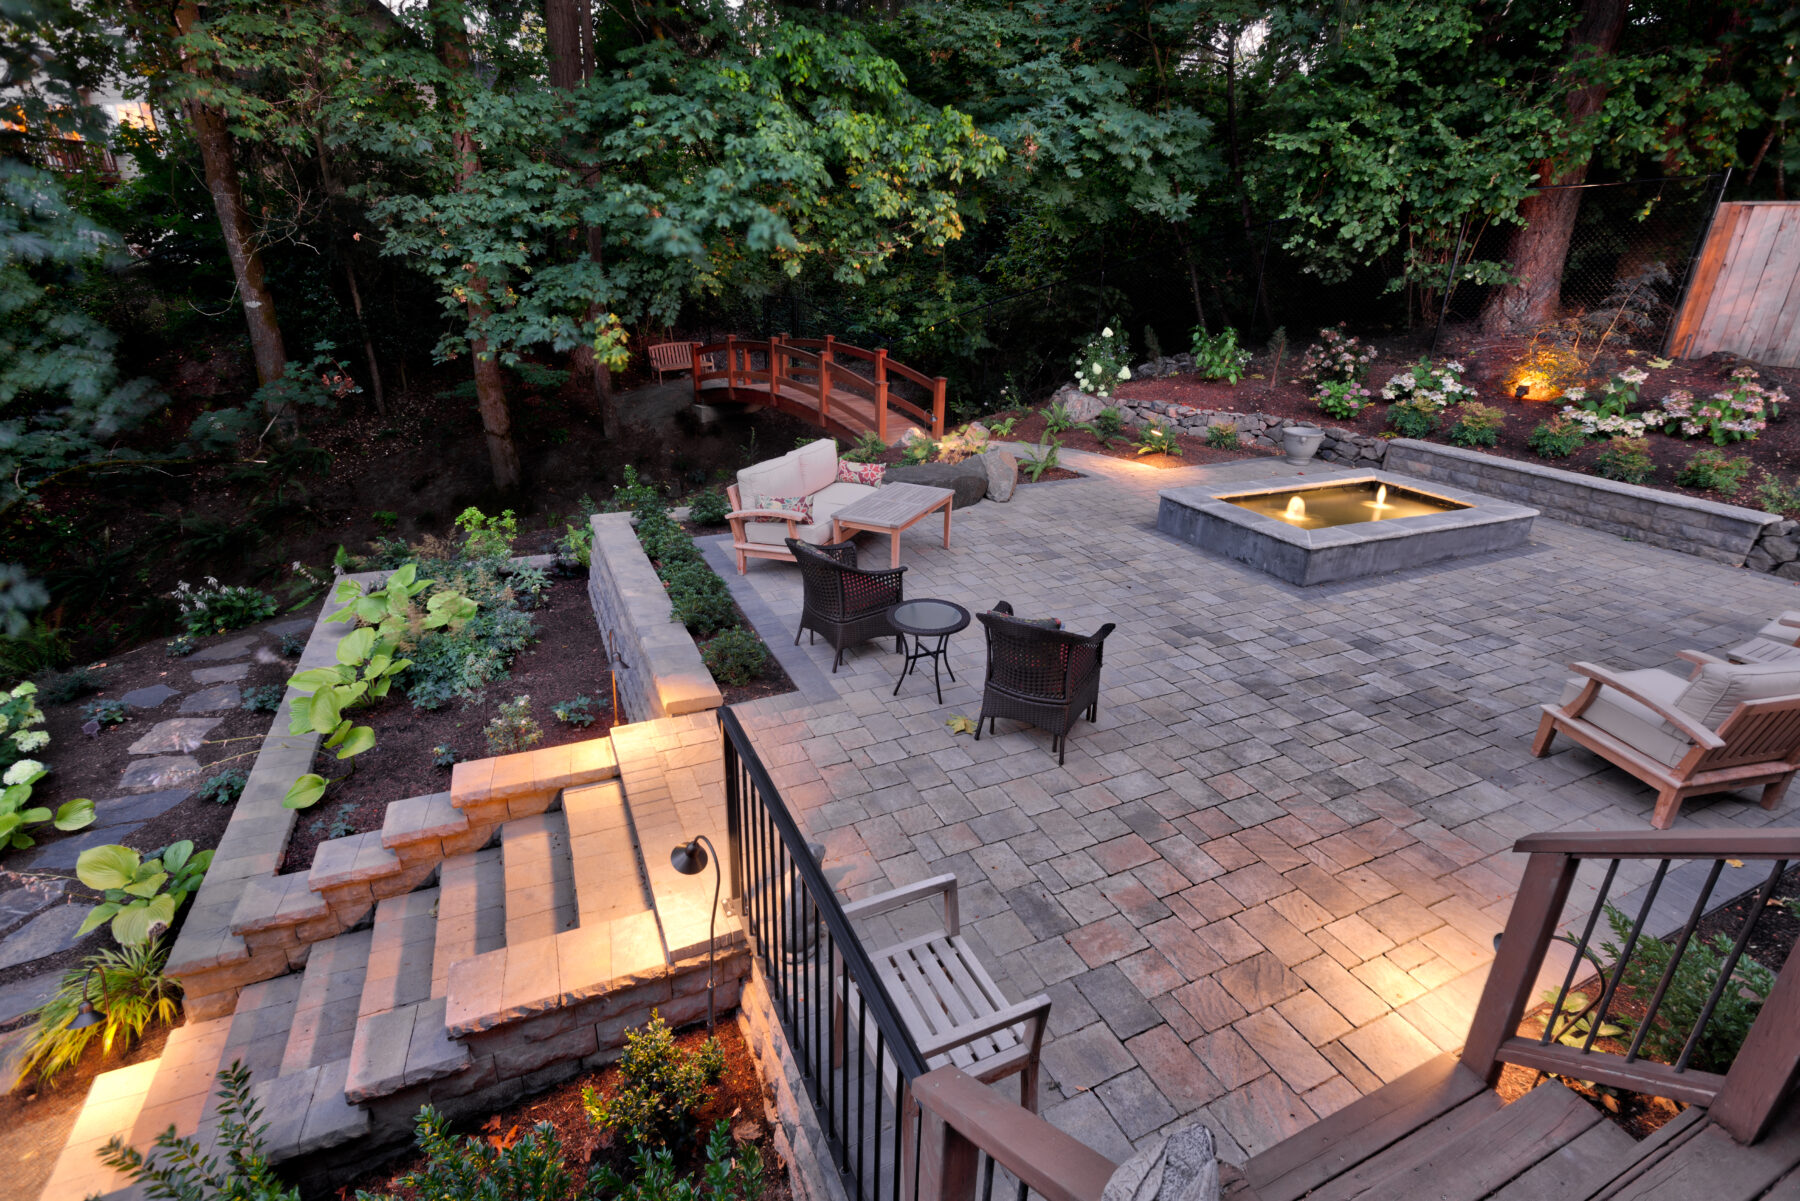 Illuminated evening hardscape patio with fire pit and outdoor furniture set amidst a lush Pacific Northwest garden, ideal for hosting and social gatherings